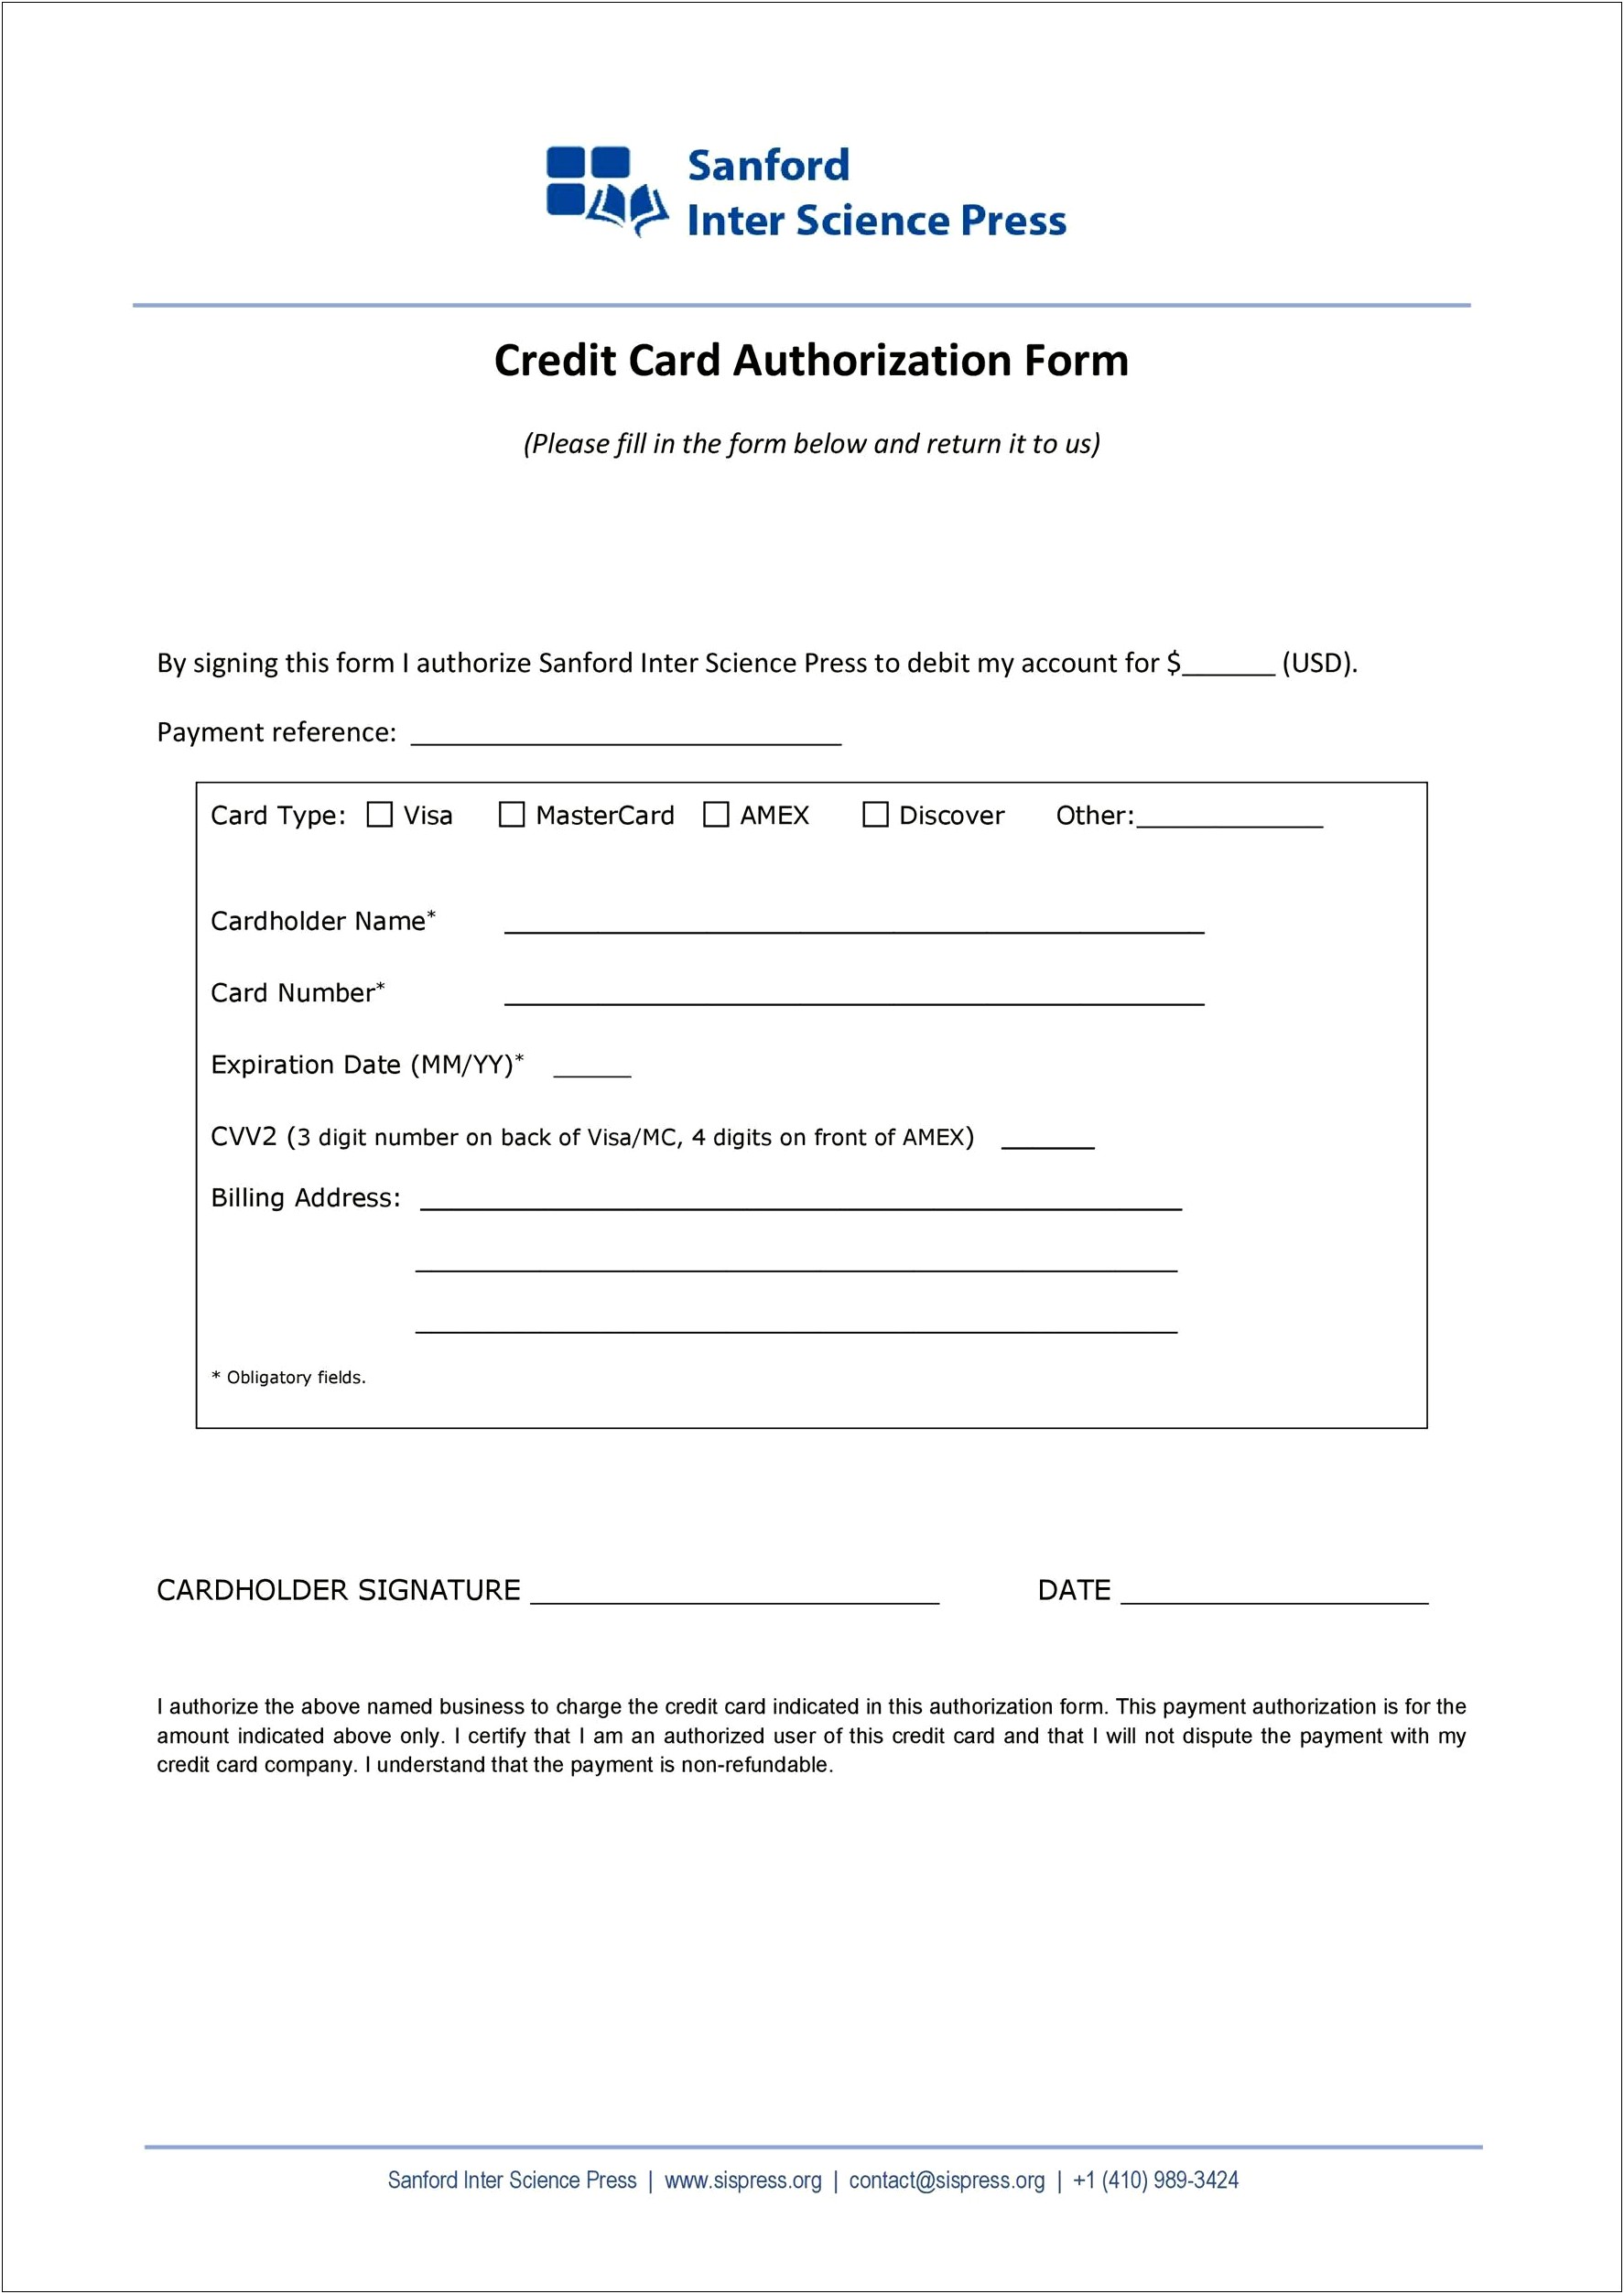 Credit Card Authorization Form Template Microsoft Word